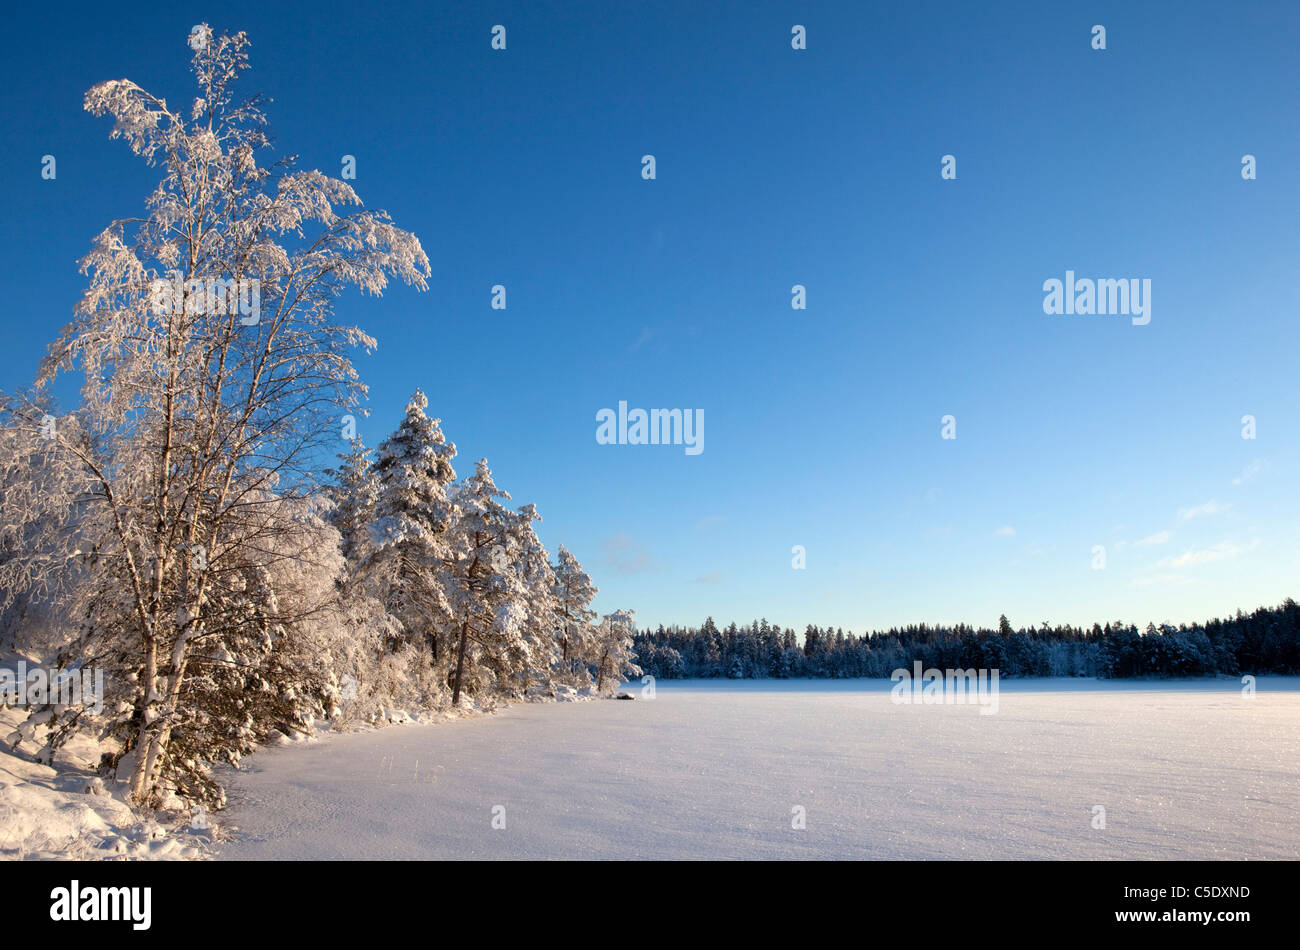 Peaceful winter landscape with snowed birch trees against clear blue sky Stock Photo